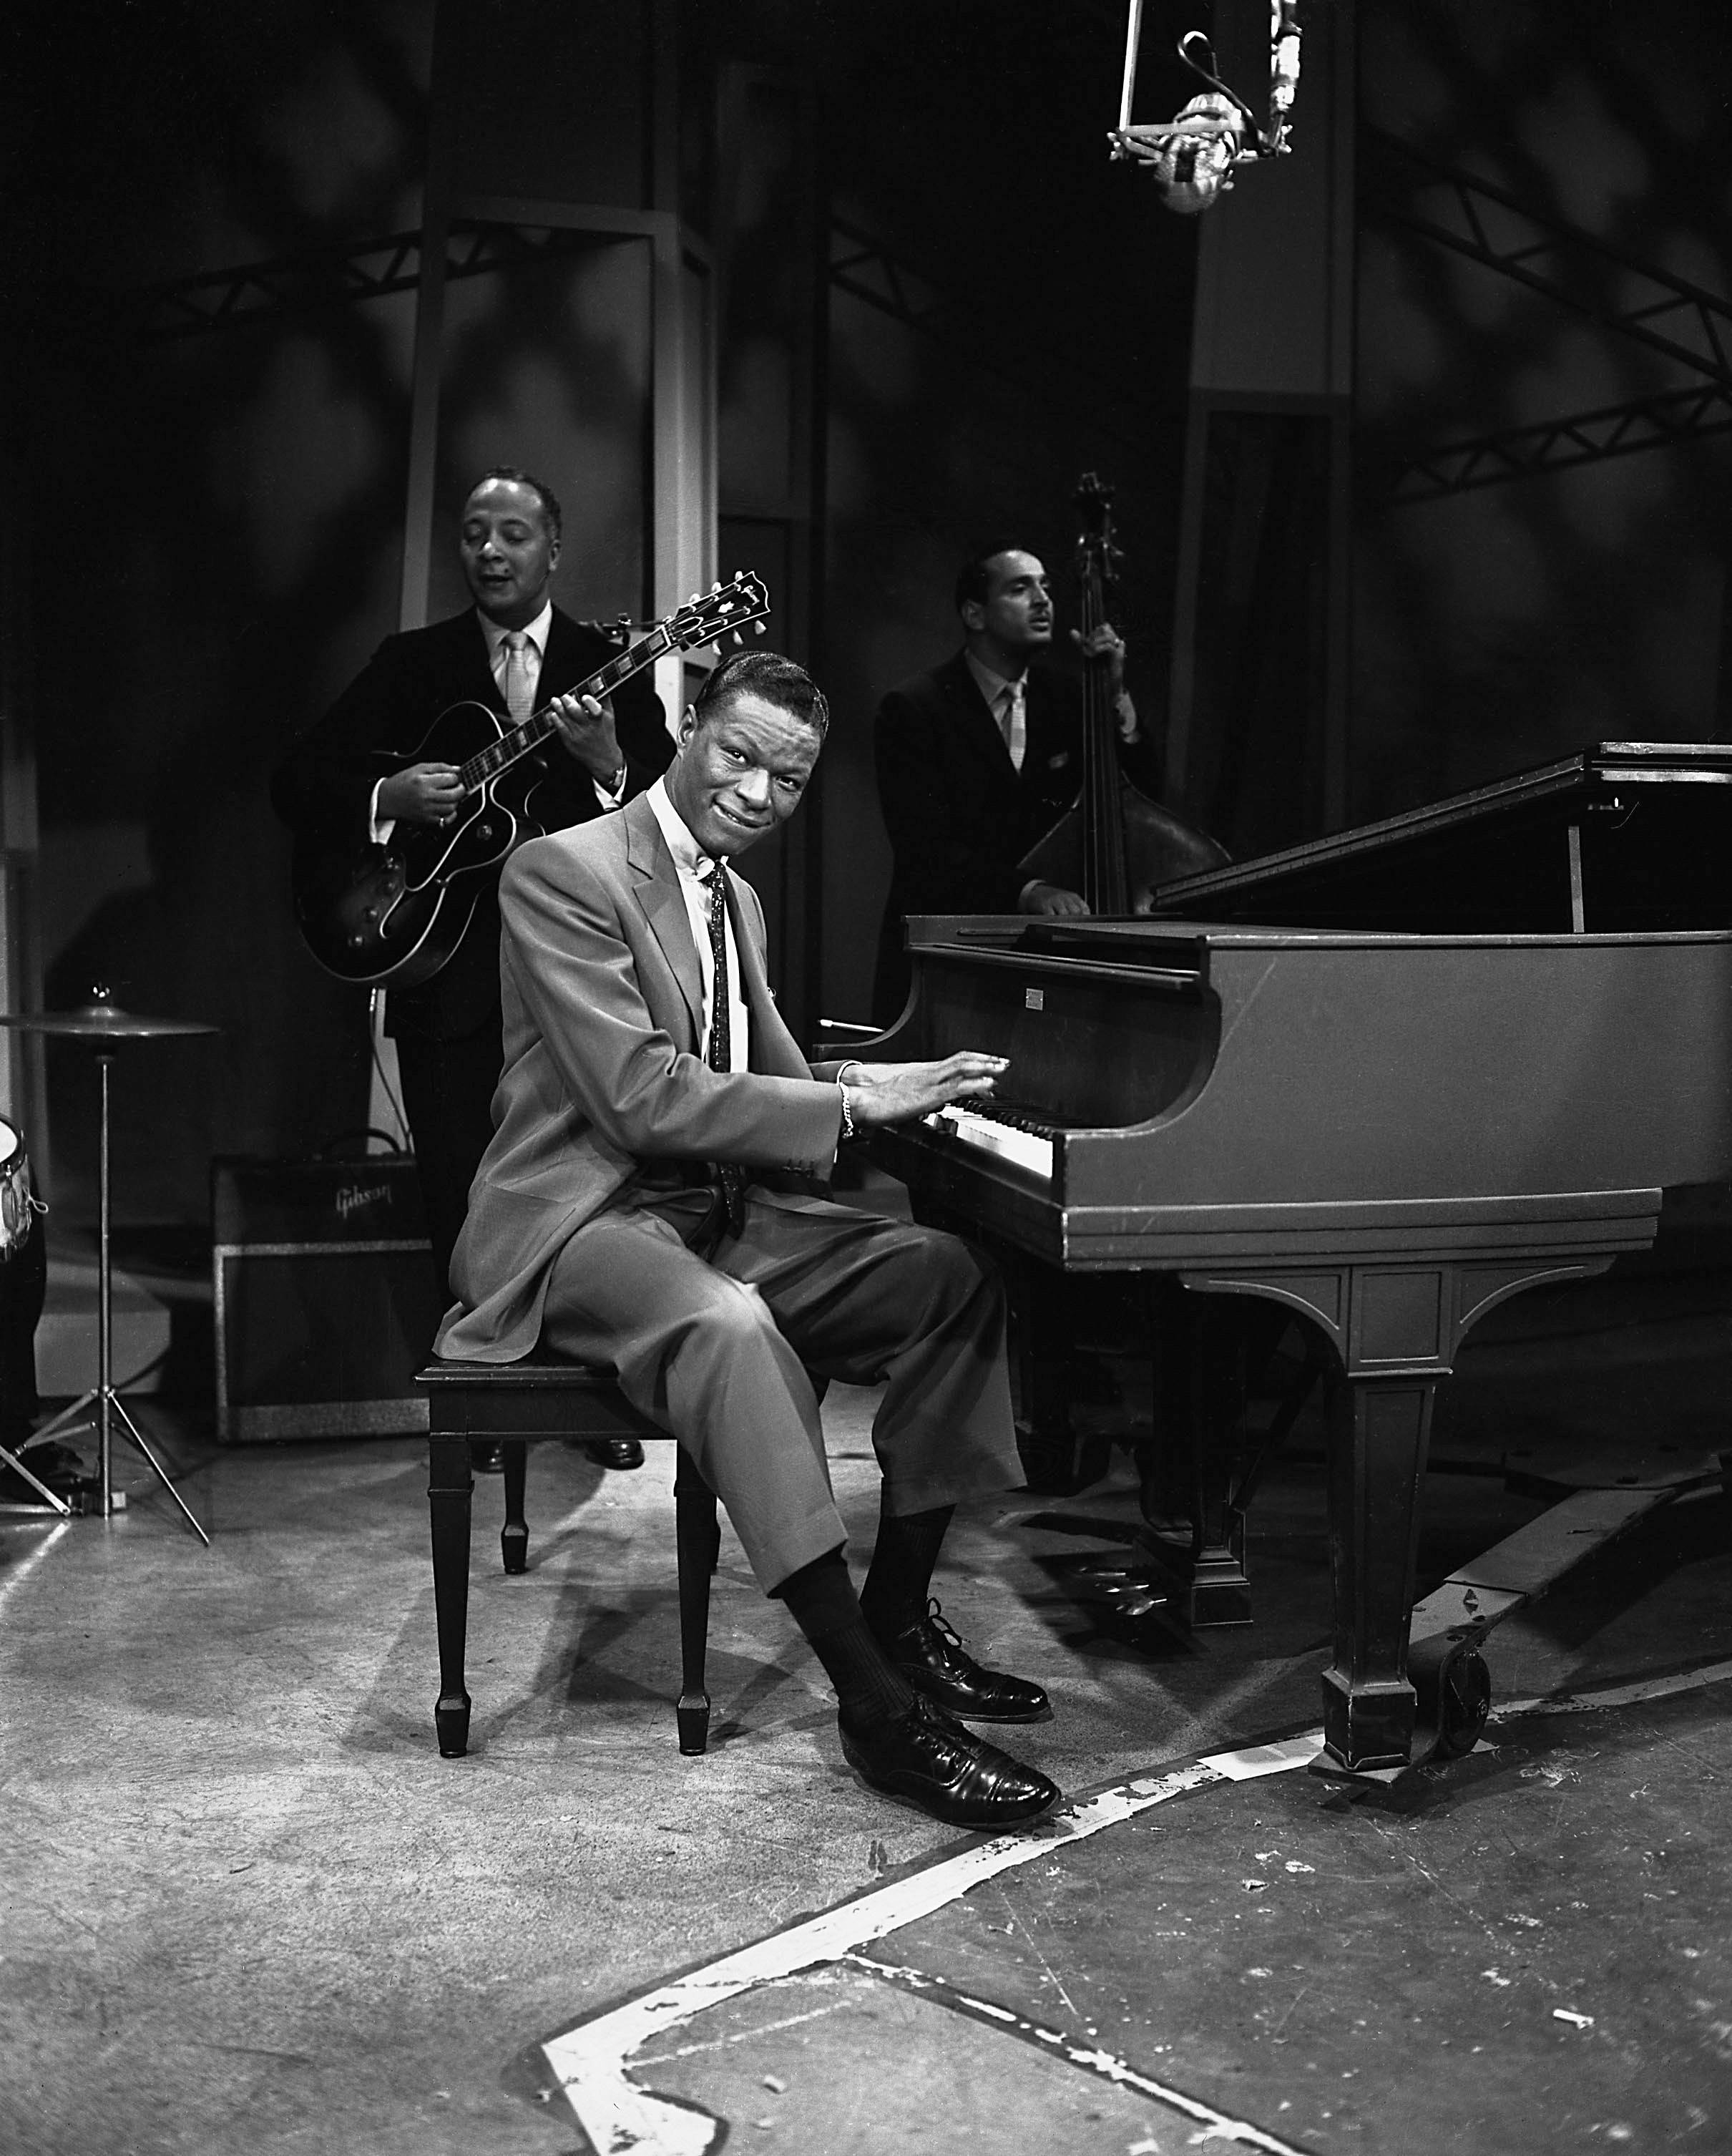 Nat King Cole: The Nat King Cole Show - In 1956, singer/musician Nat King Cole made history by becoming the first African-American celebrity to have his own TV show. Unfortunately, the variety show was canceled after one season. NBC couldn’t find advertisers or, as Nat so famously said, “Madison Avenue is afraid of the dark.”(Photo: CBS/Landov)